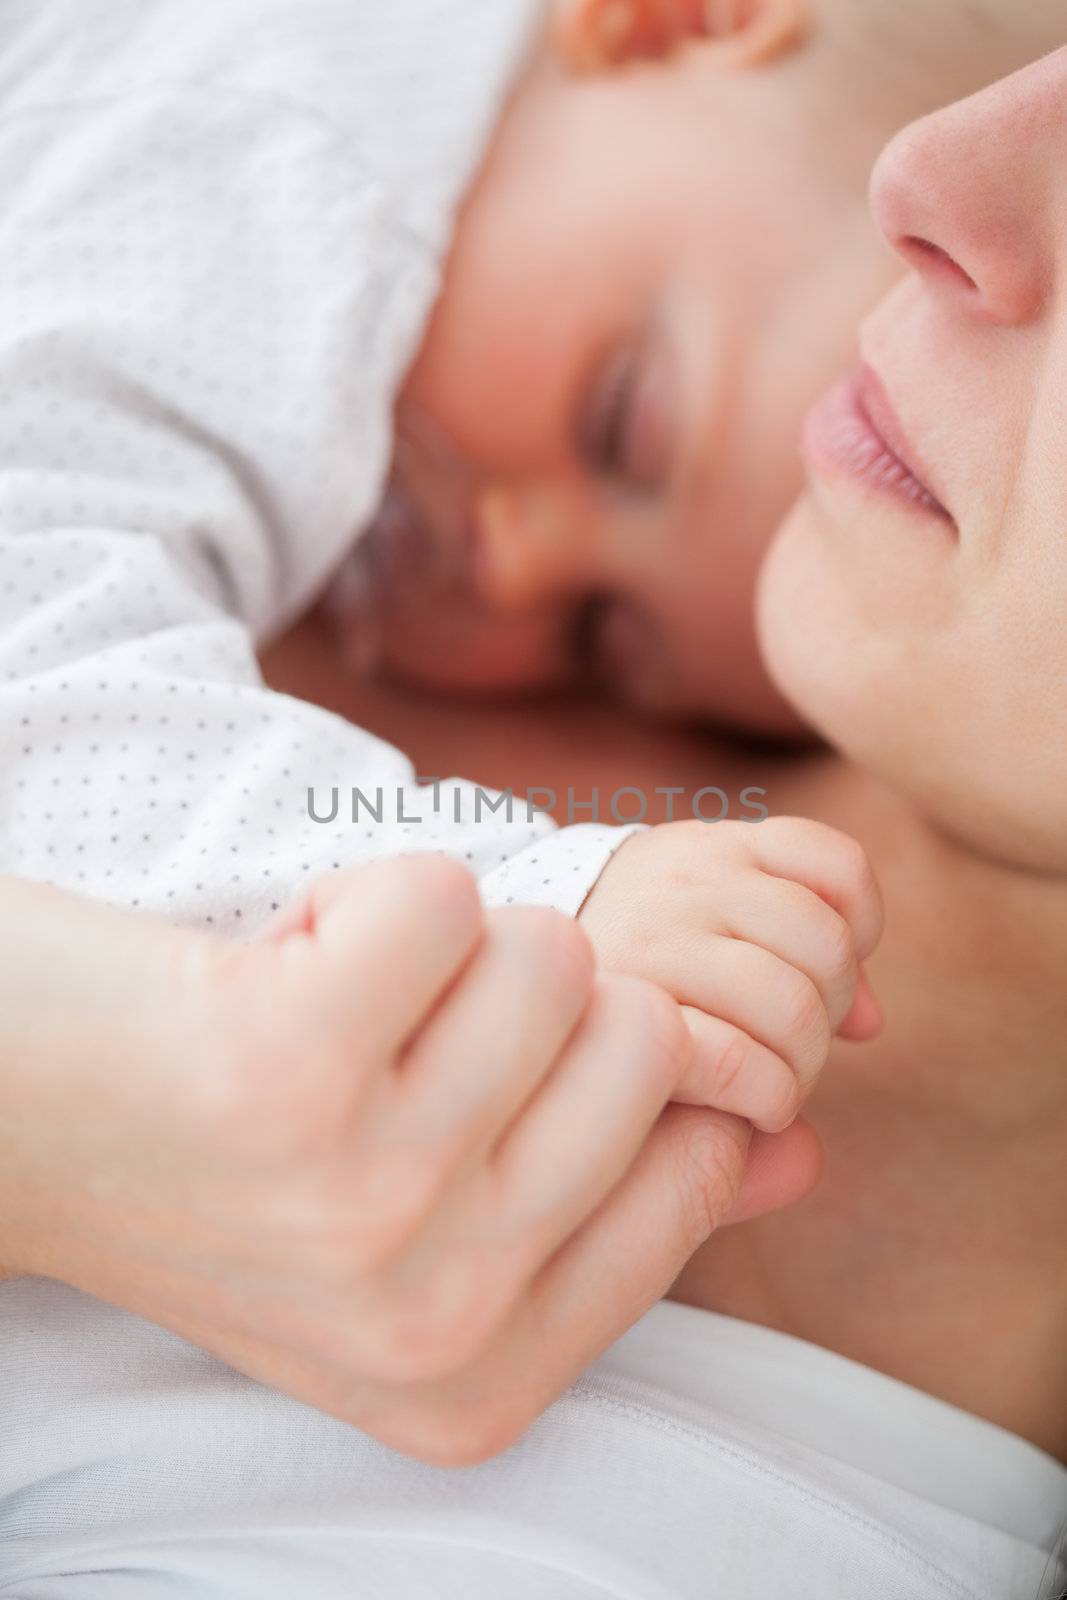 Peaceful woman lying with her baby who is sucking a pacifier indoors